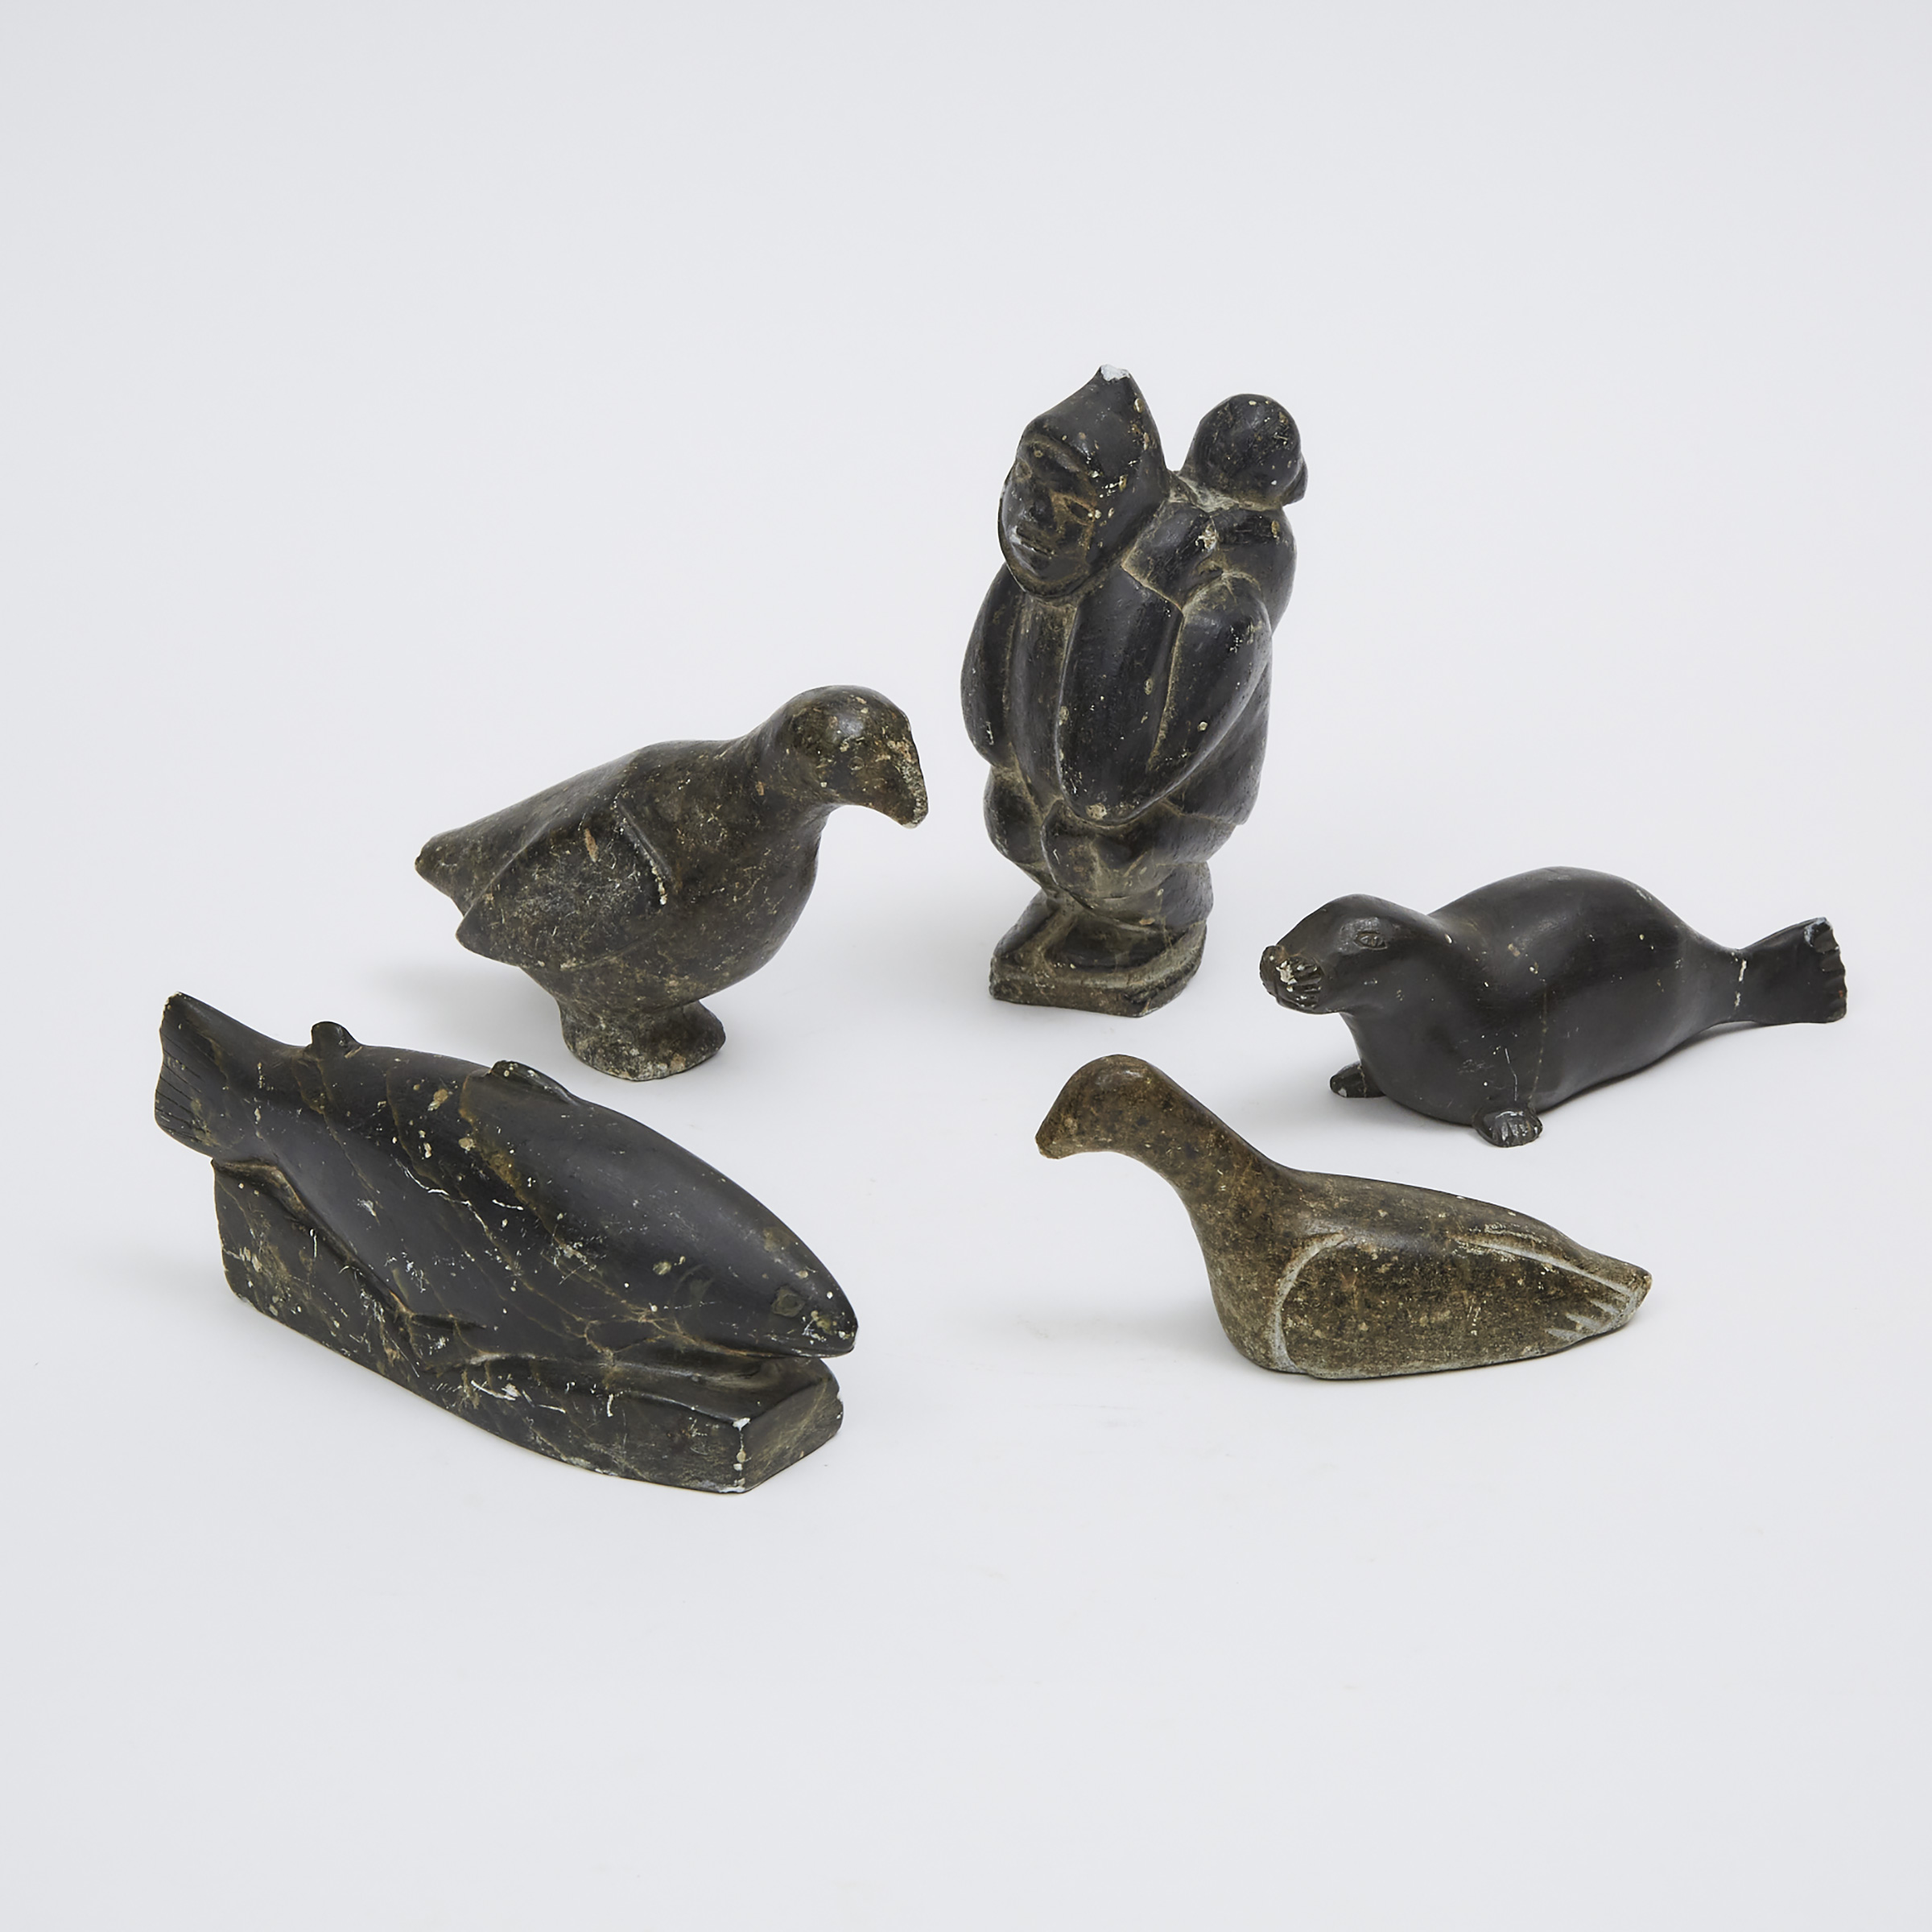 COLLECTION OF  SMALL INUIT STONE CARVINGS